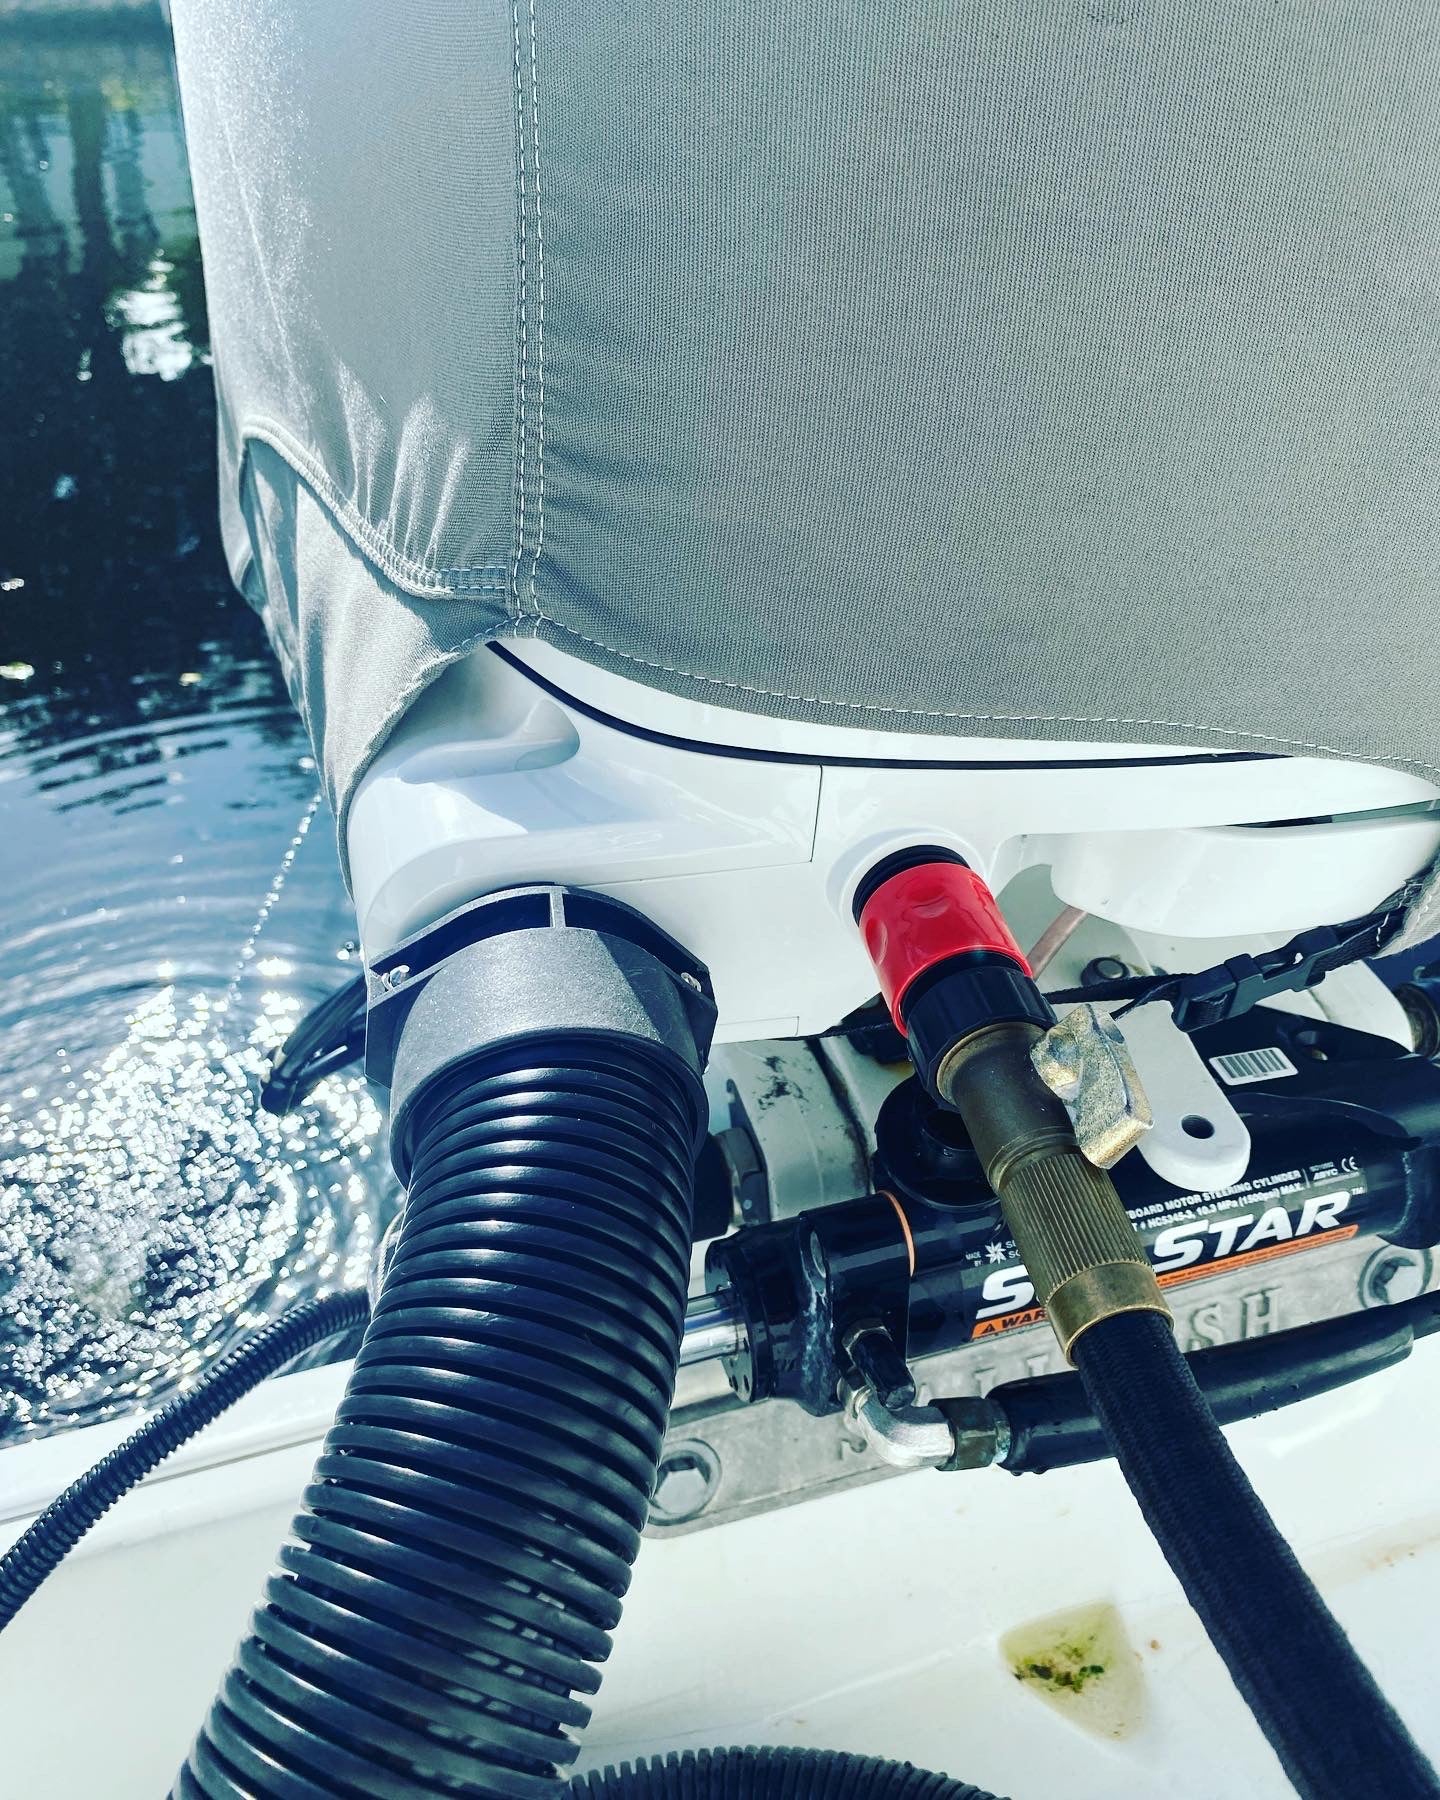 Suzuki Outboard Flush Quick Connect in action.